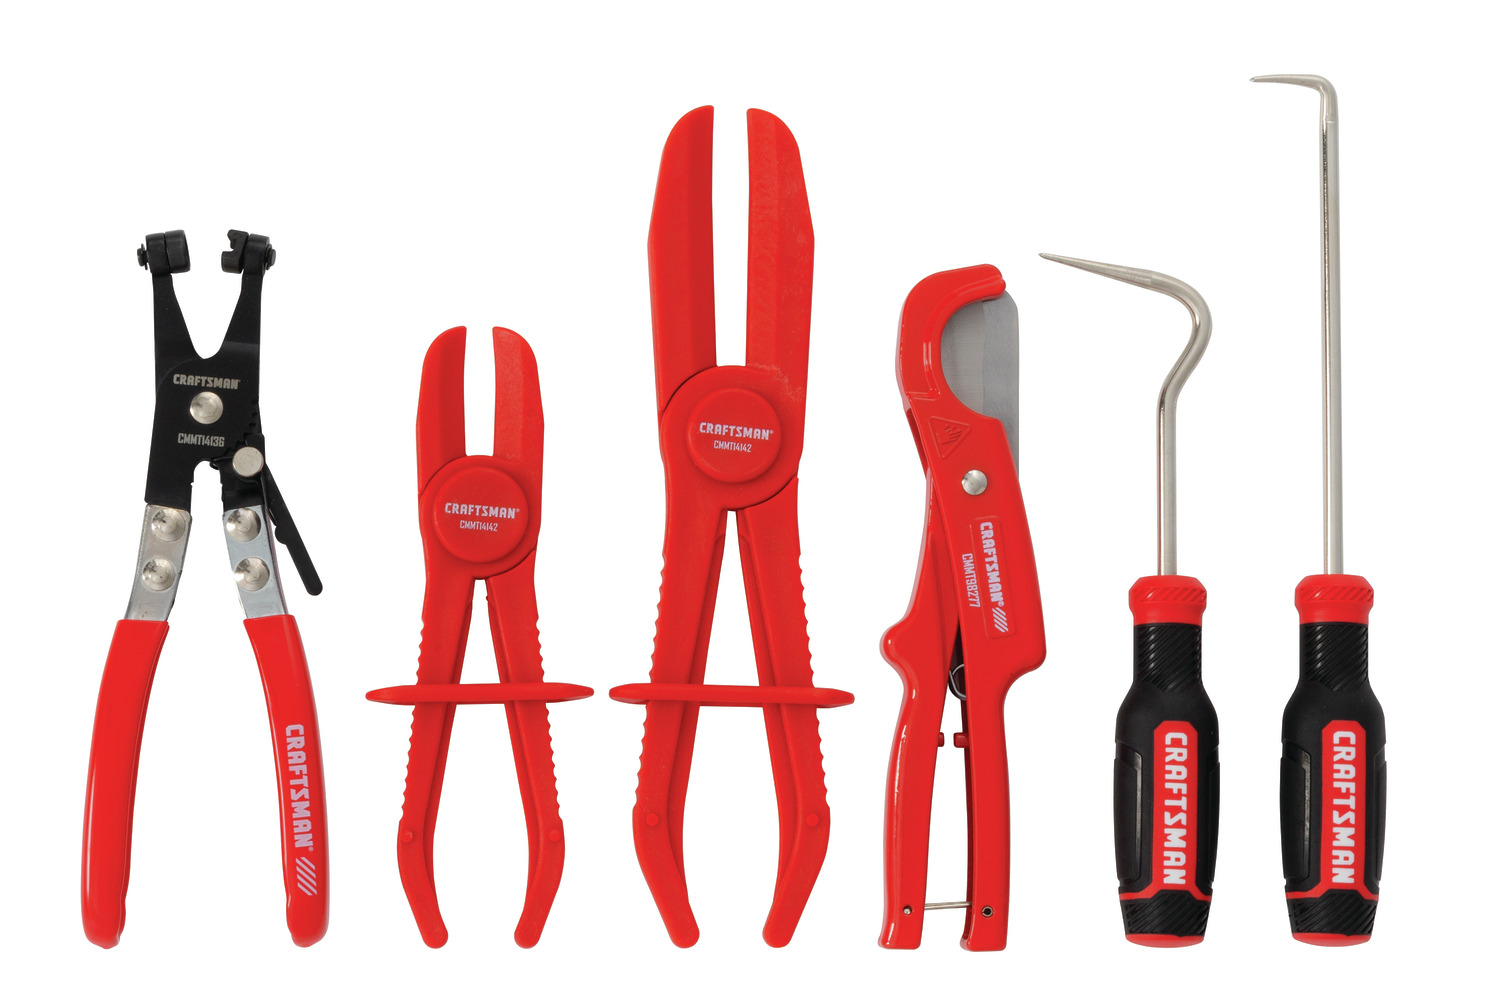 CRAFTSMAN Introduces 50+ New Automotive Specialty Tools